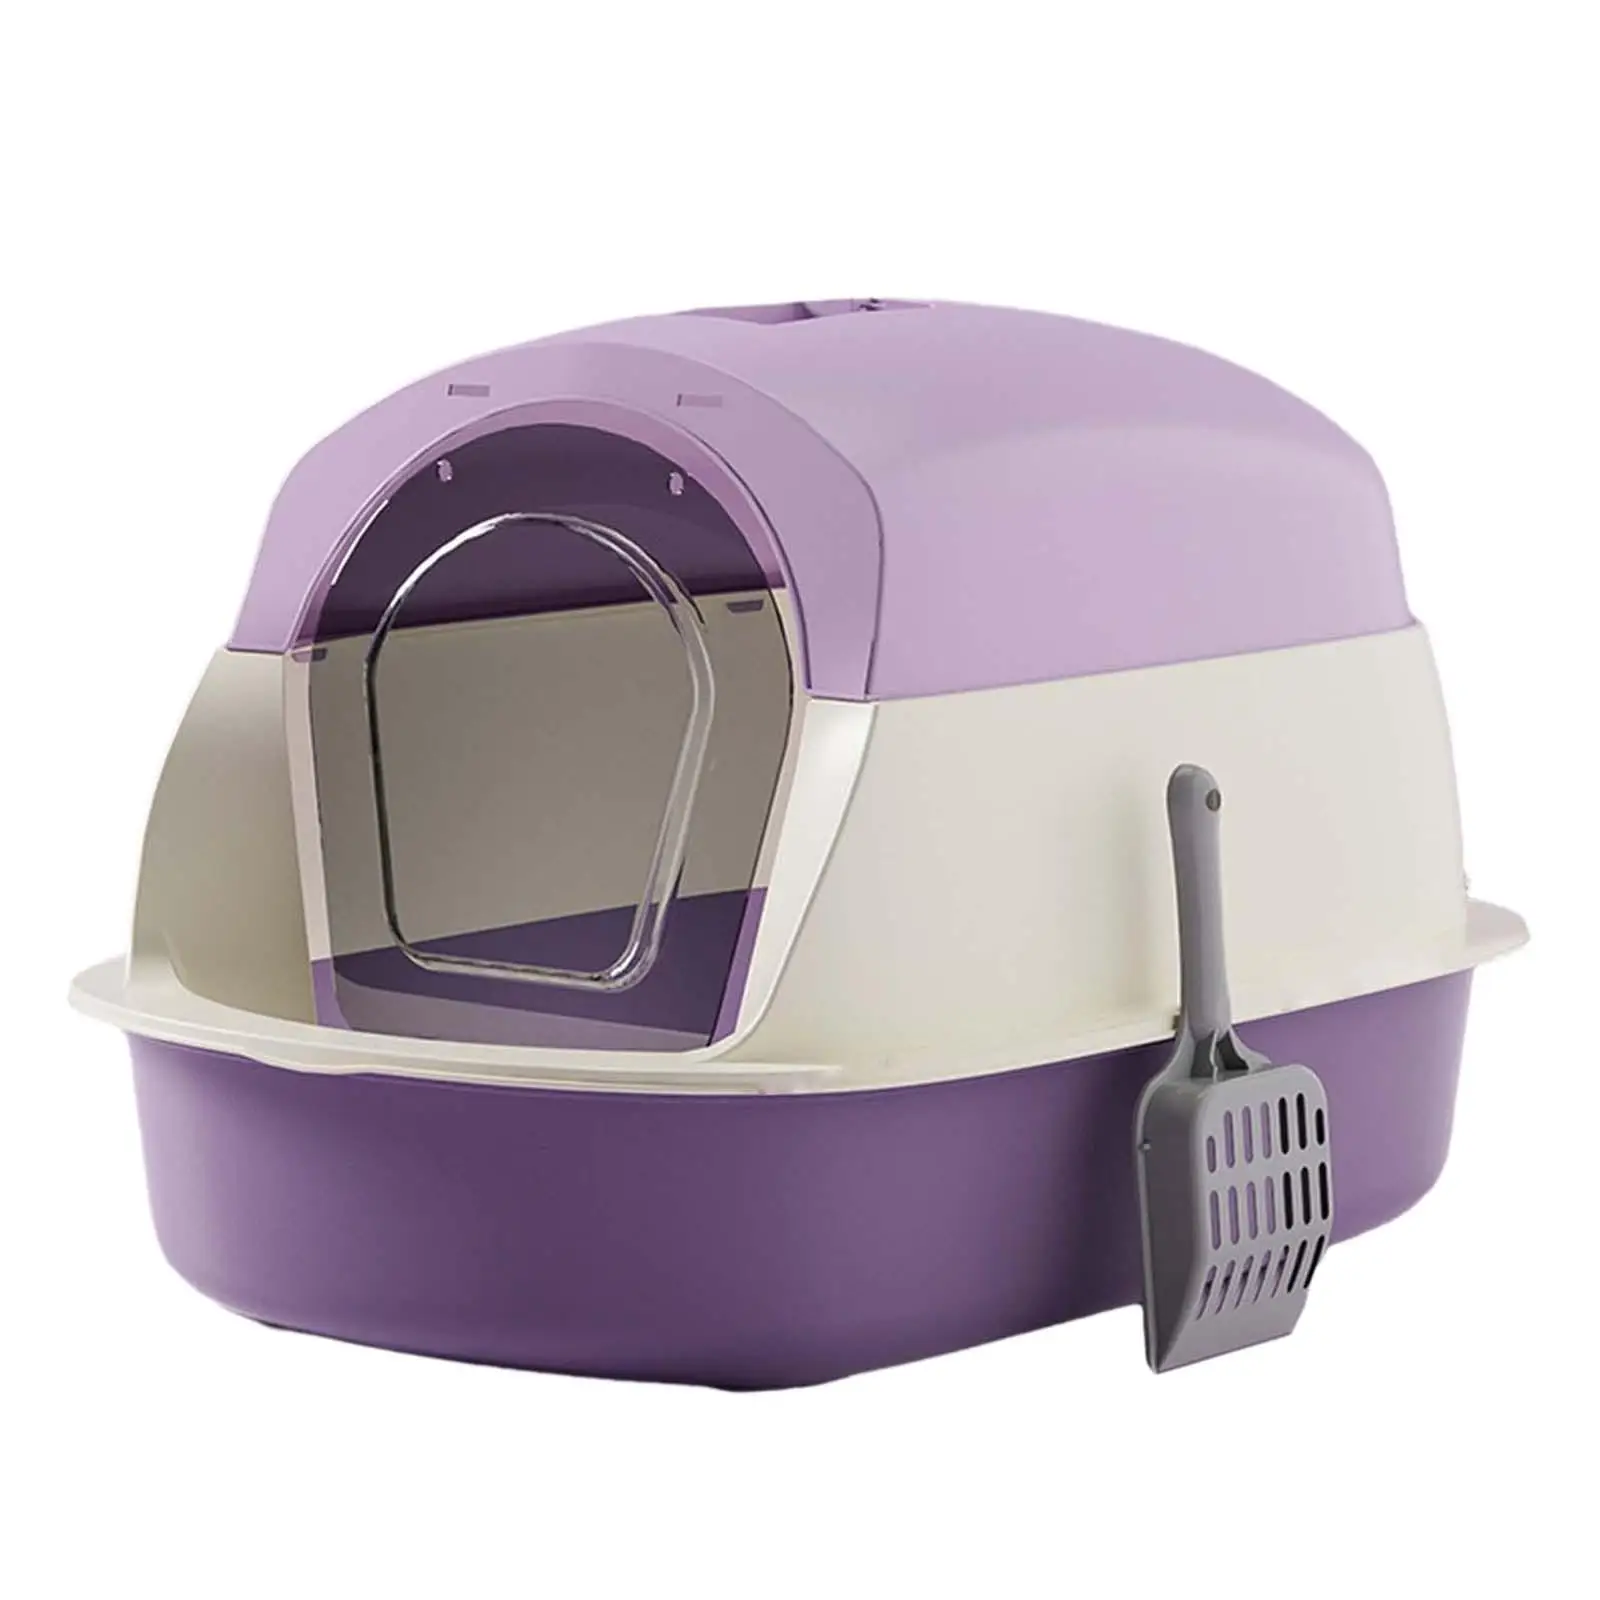 Closed Cat Litter Box with Fully Enclosed Litter Box Durable Cat Litter Box with Door